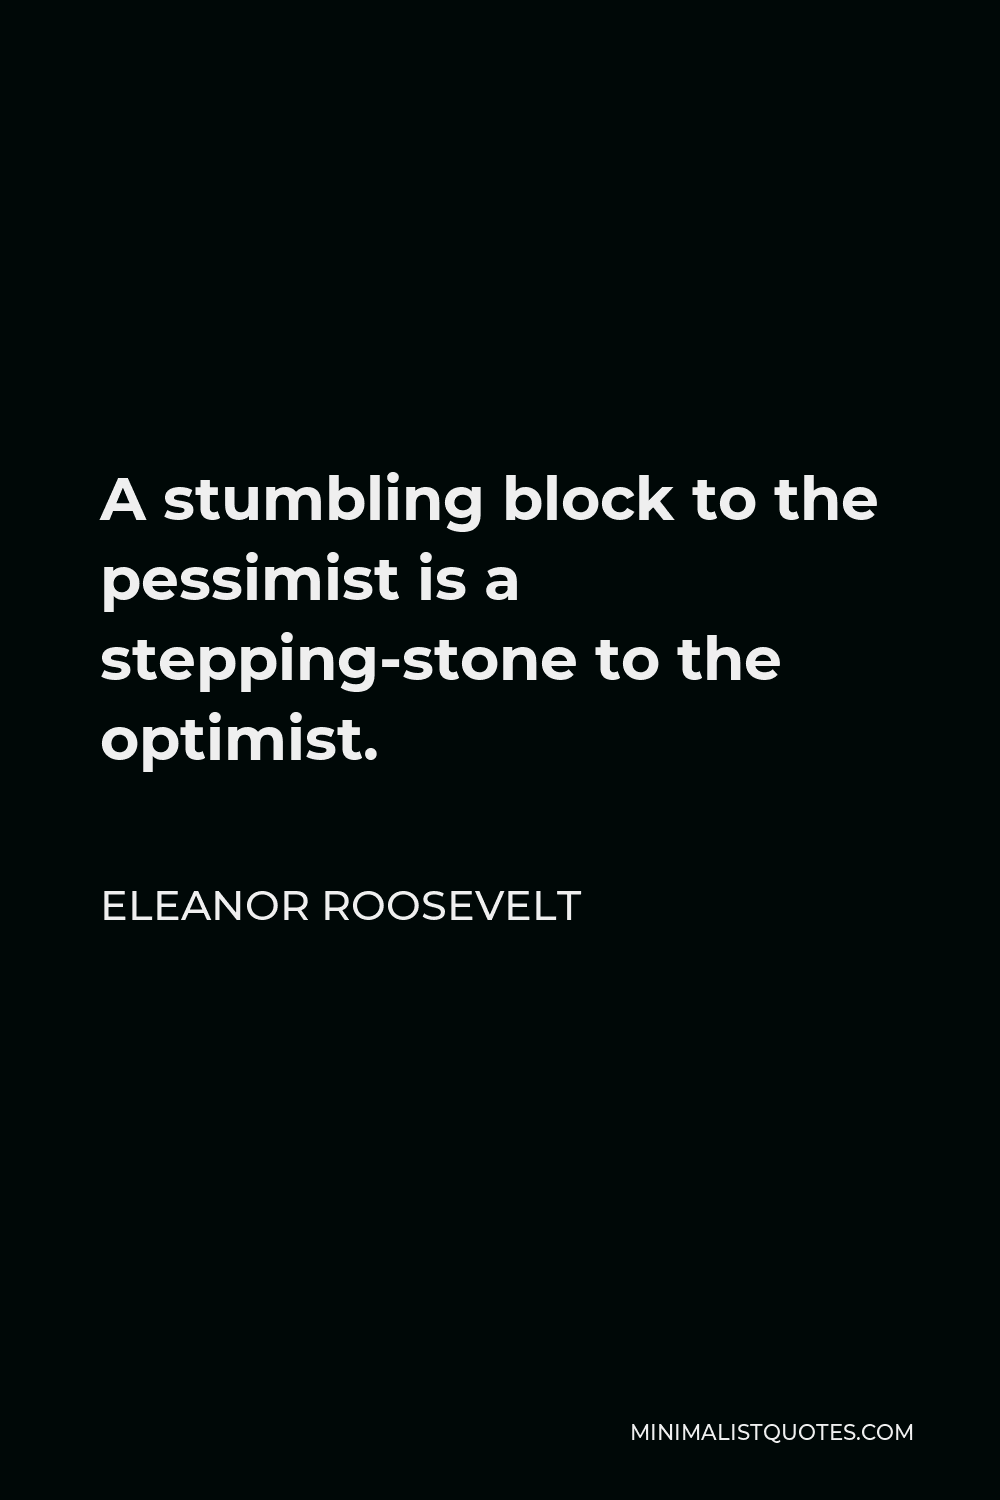 Eleanor Roosevelt Quote - A stumbling block to the pessimist is a stepping-stone to the optimist.